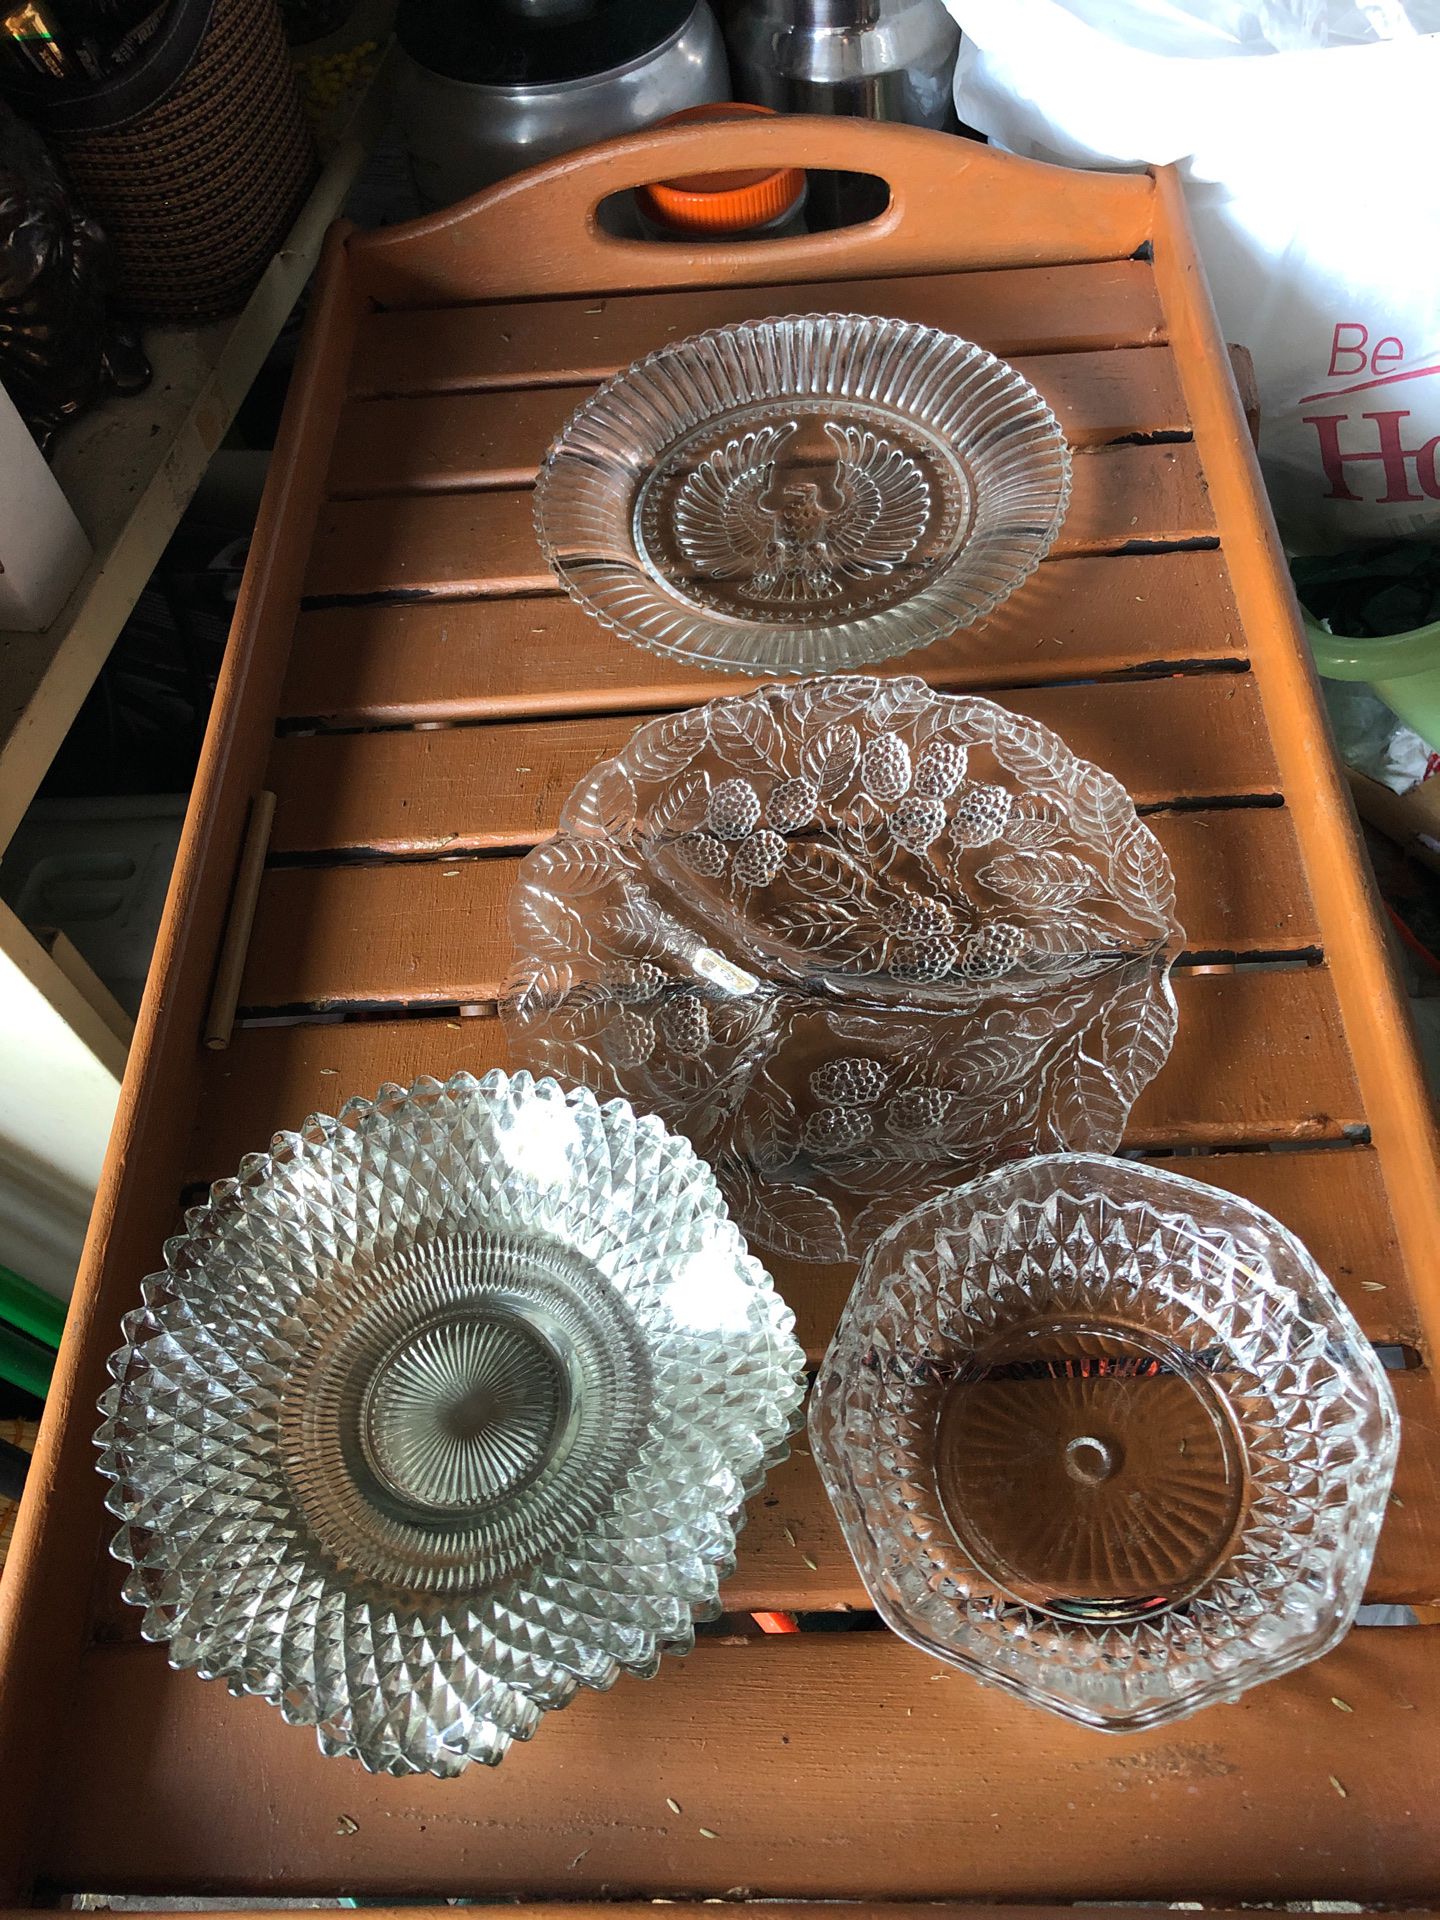 4 cut glass antique desserts plate 1 American eagle 🦅 plat,1 3 sectin plate and bowl , 7 pieces.